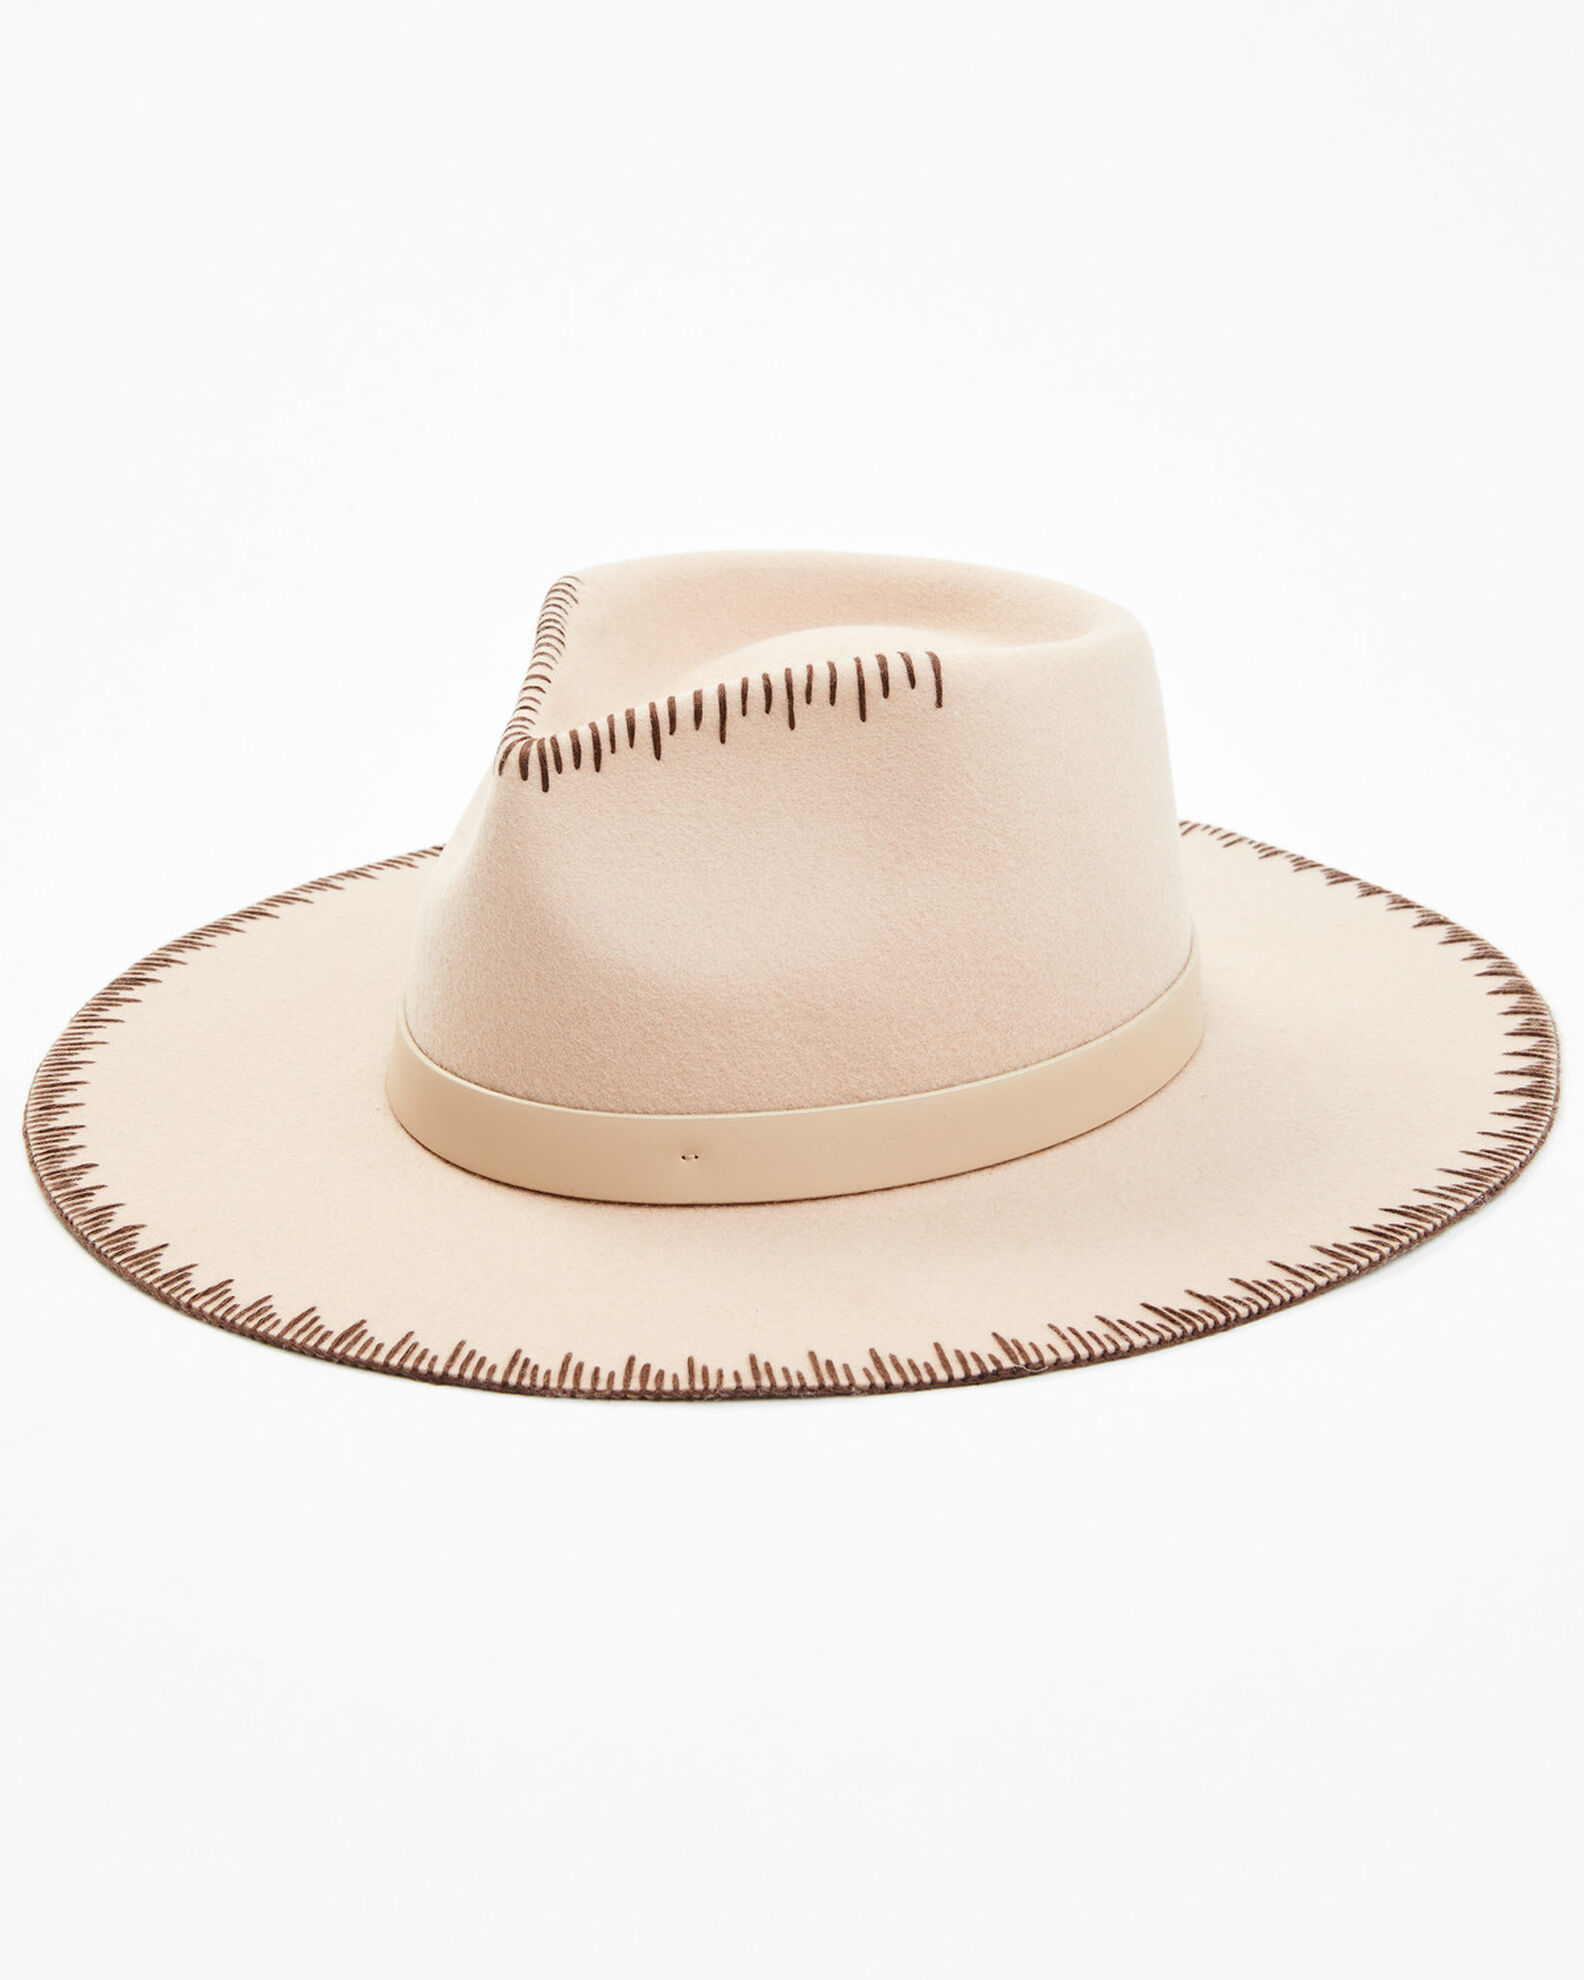 Product Name: Shyanne Women's Embroidered Edge Felt Western Fashion Hat